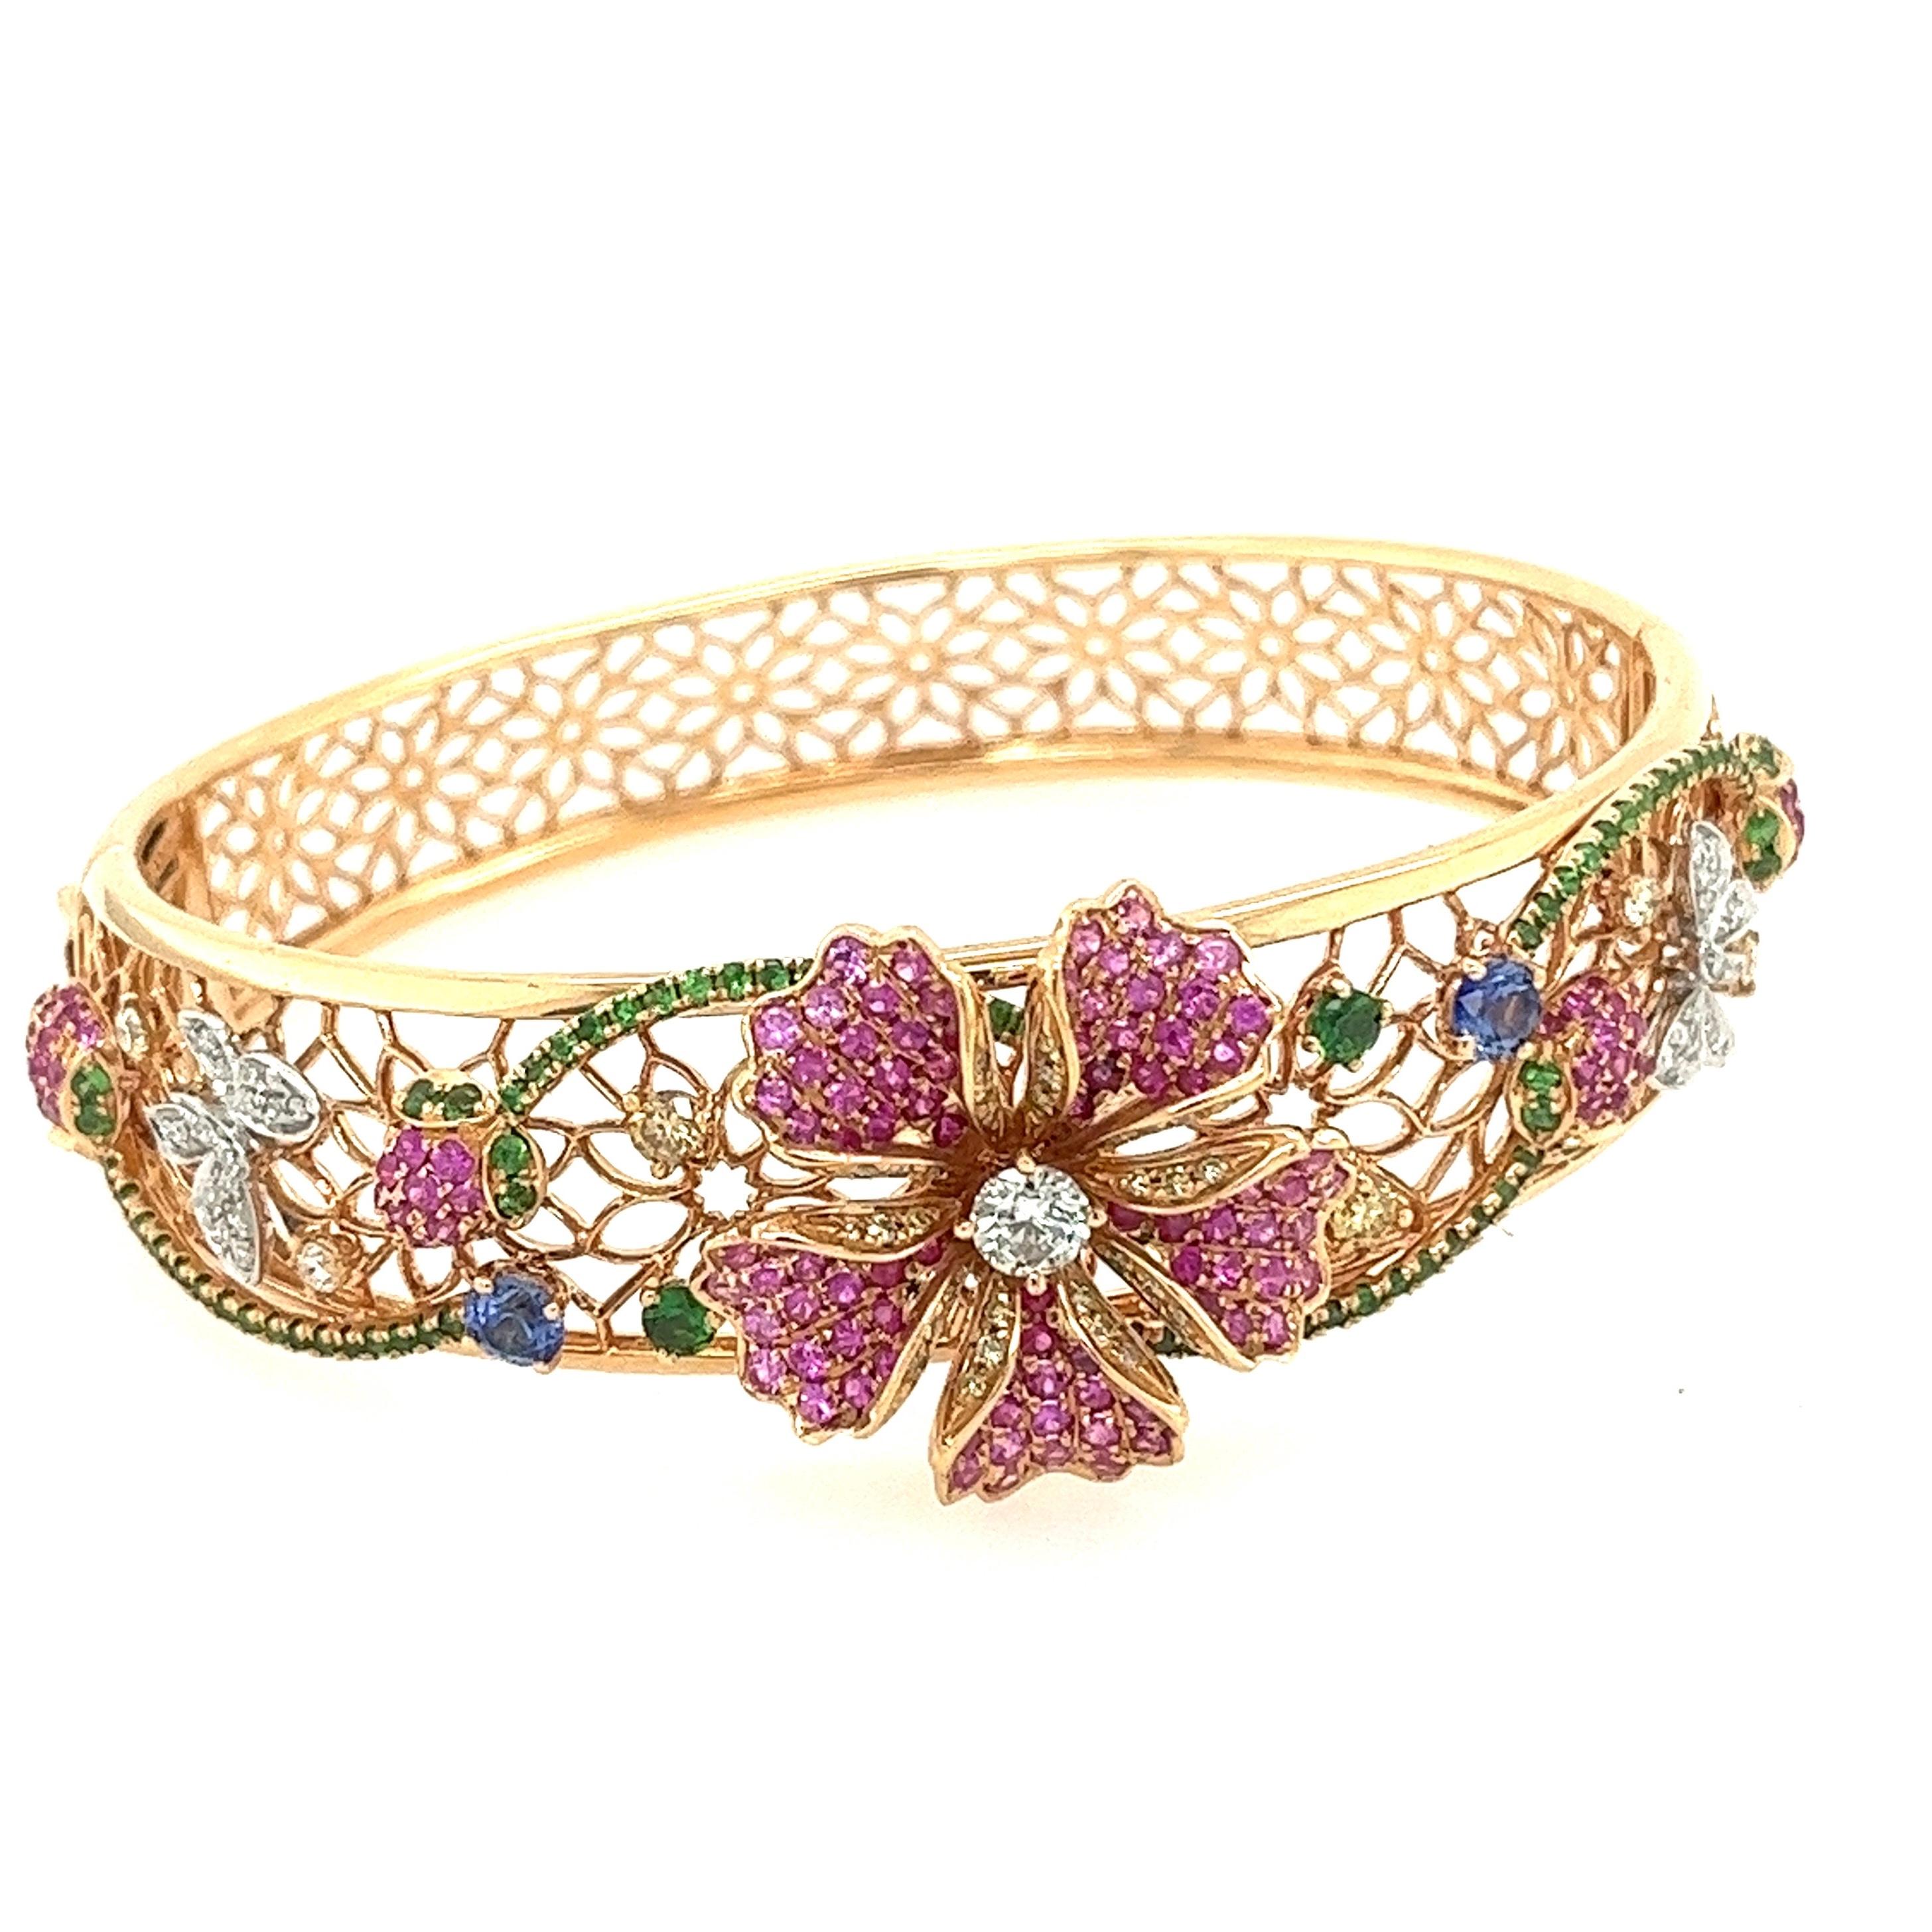 18K Rose Gold Ruby/Pink Sapphire Garden Collection Bracelet with Diamonds

2 Blue Sapphires - 0.40 CT
32 Diamonds - 0.14 CT
37 Diamonds - 0.52 CT
82 Green Garnets - 0.86 CT
125 Pink Sapphires - 1.38 CT
30 Rubies - 0.28 CT
18K Rose Gold - 25.15 GM

A